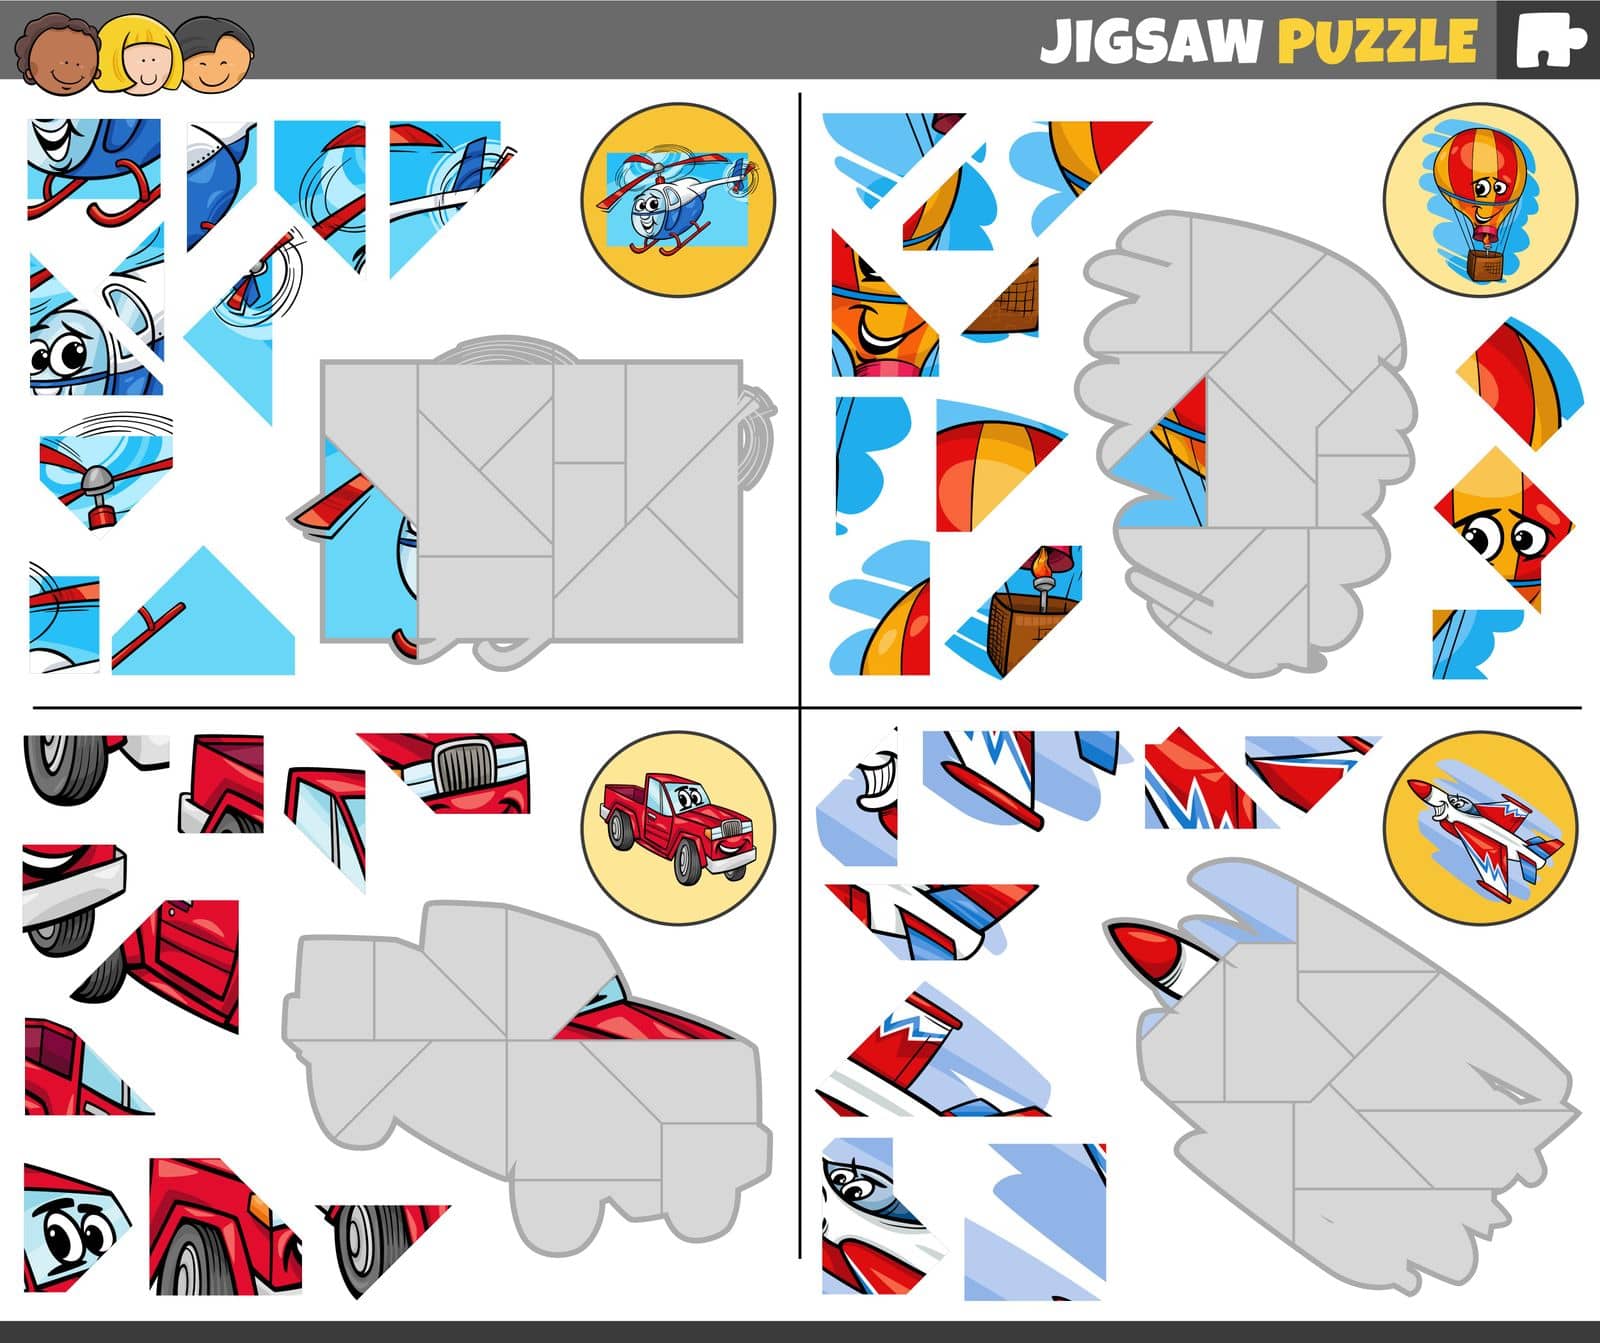 Cartoon illustration of educational jigsaw puzzle games set with transportation characters